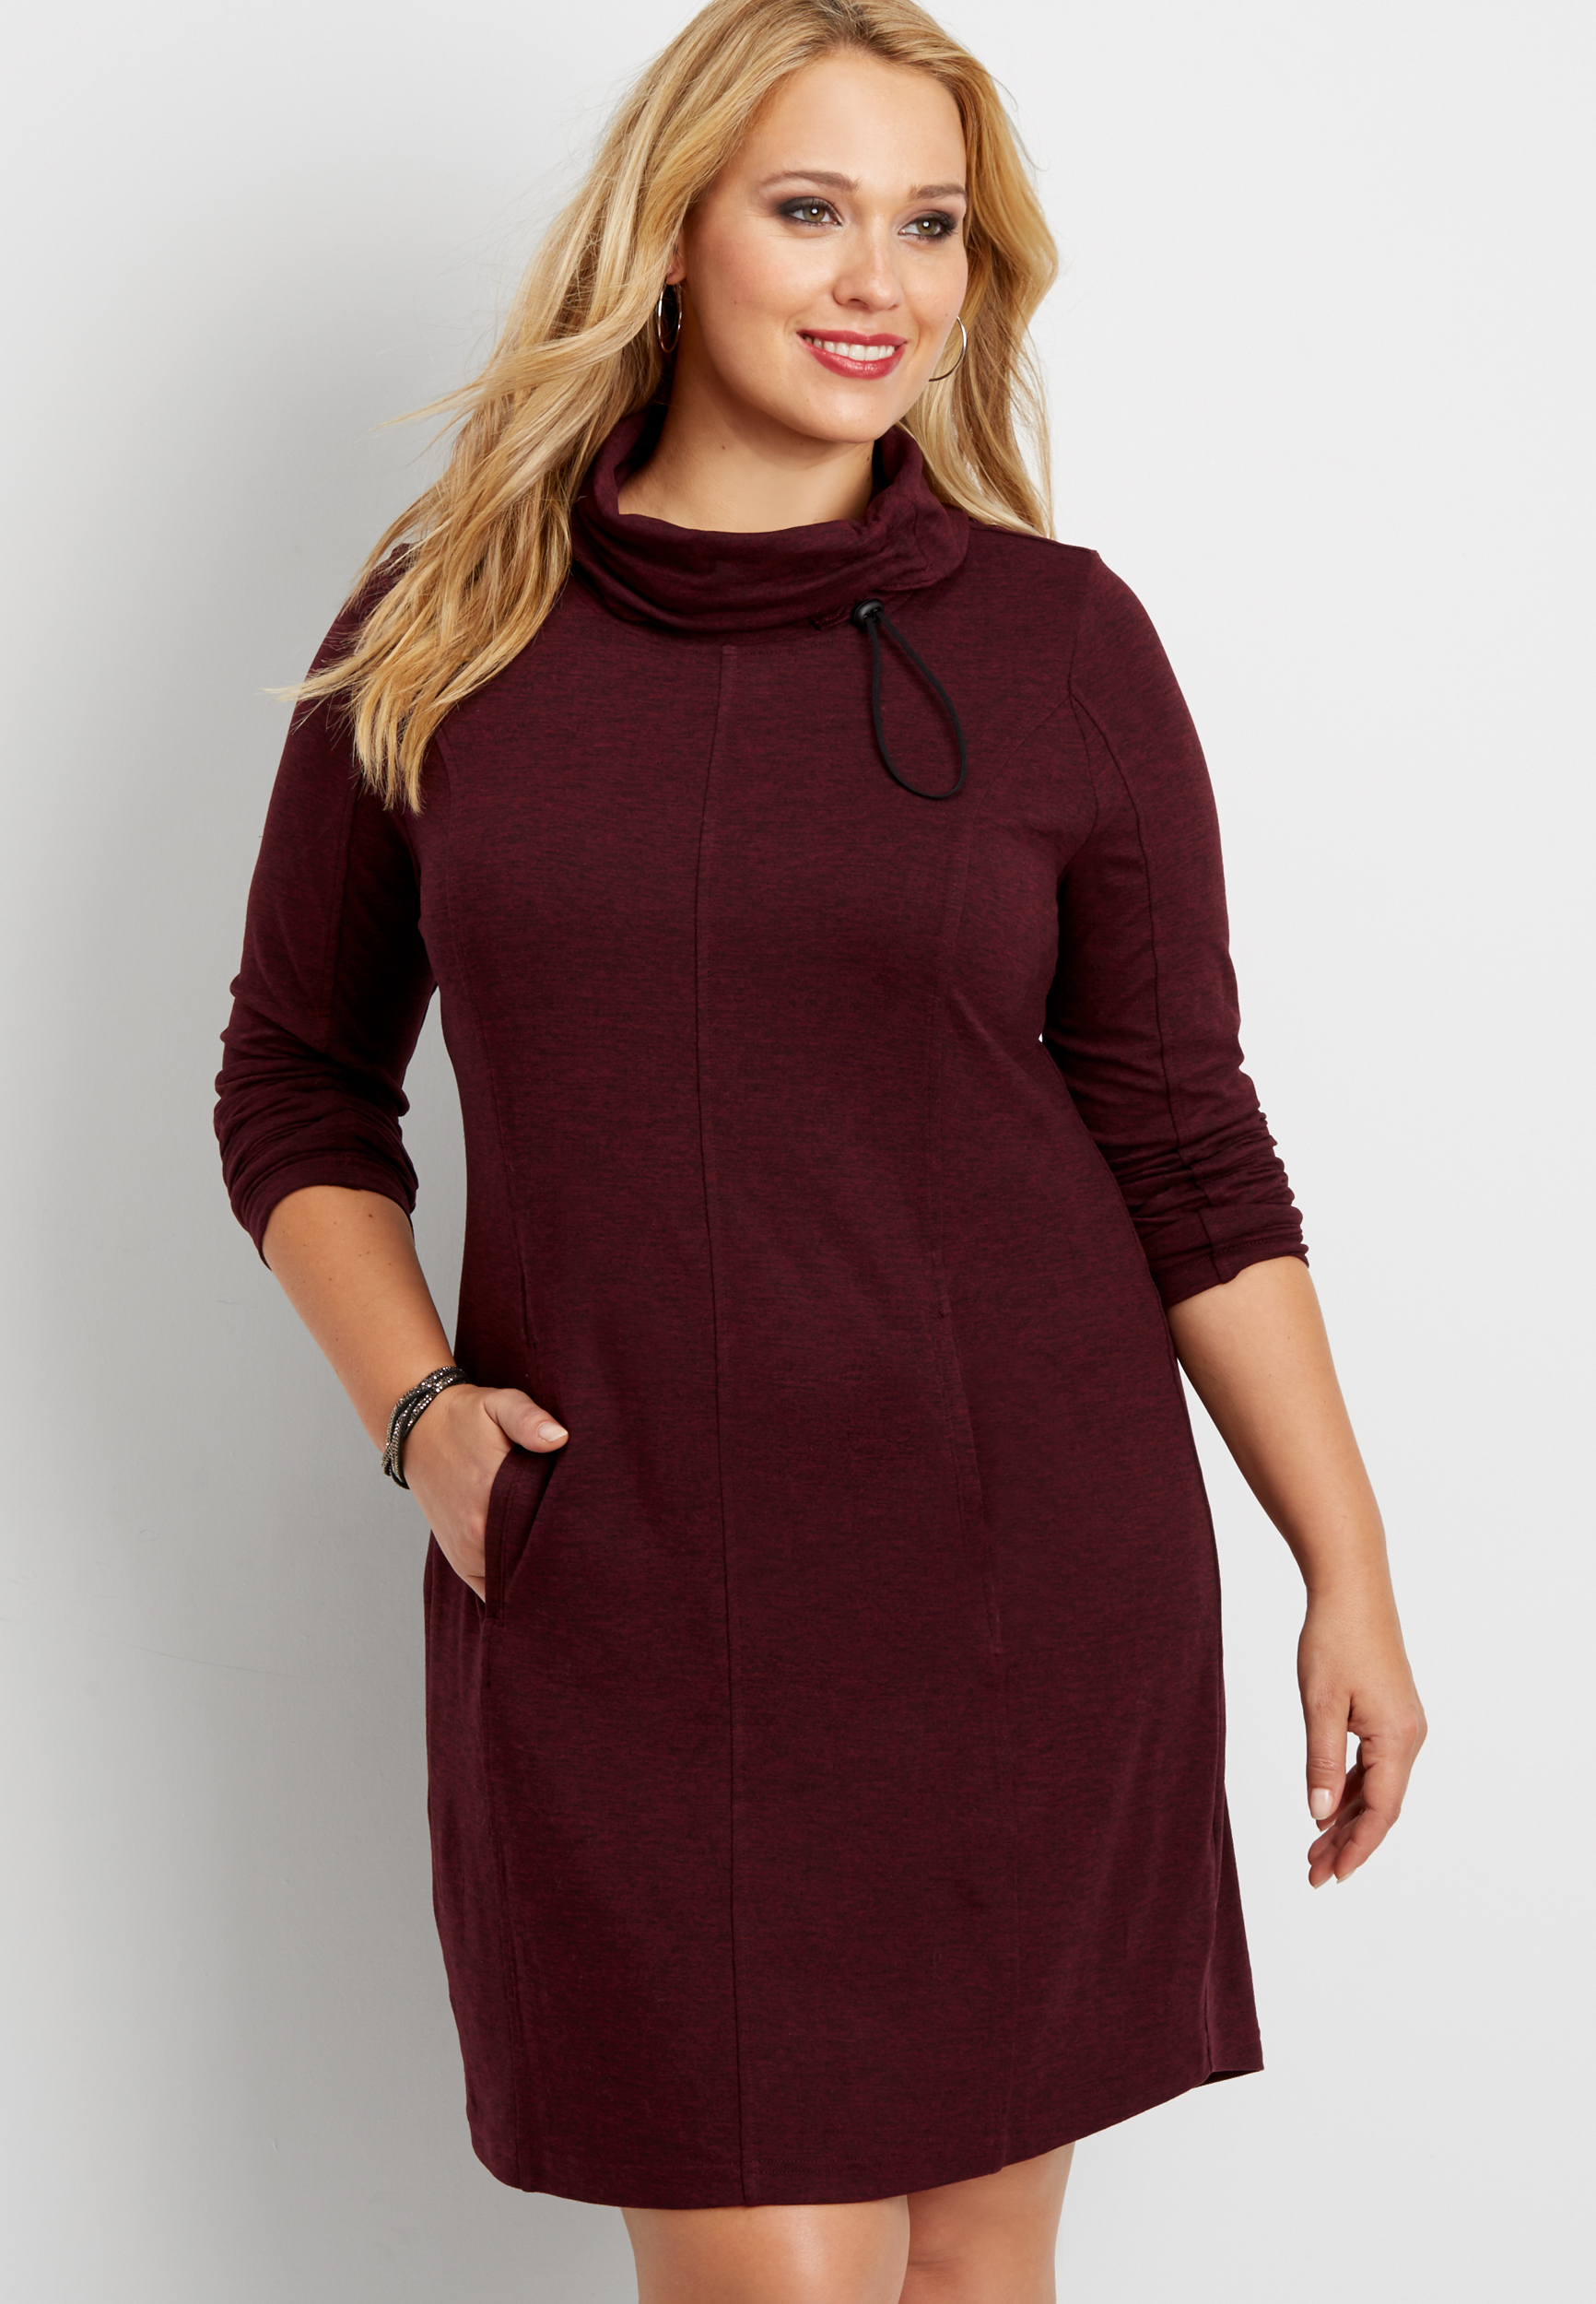 plus size ultra soft heathered dress with cinched cowl neck | maurices